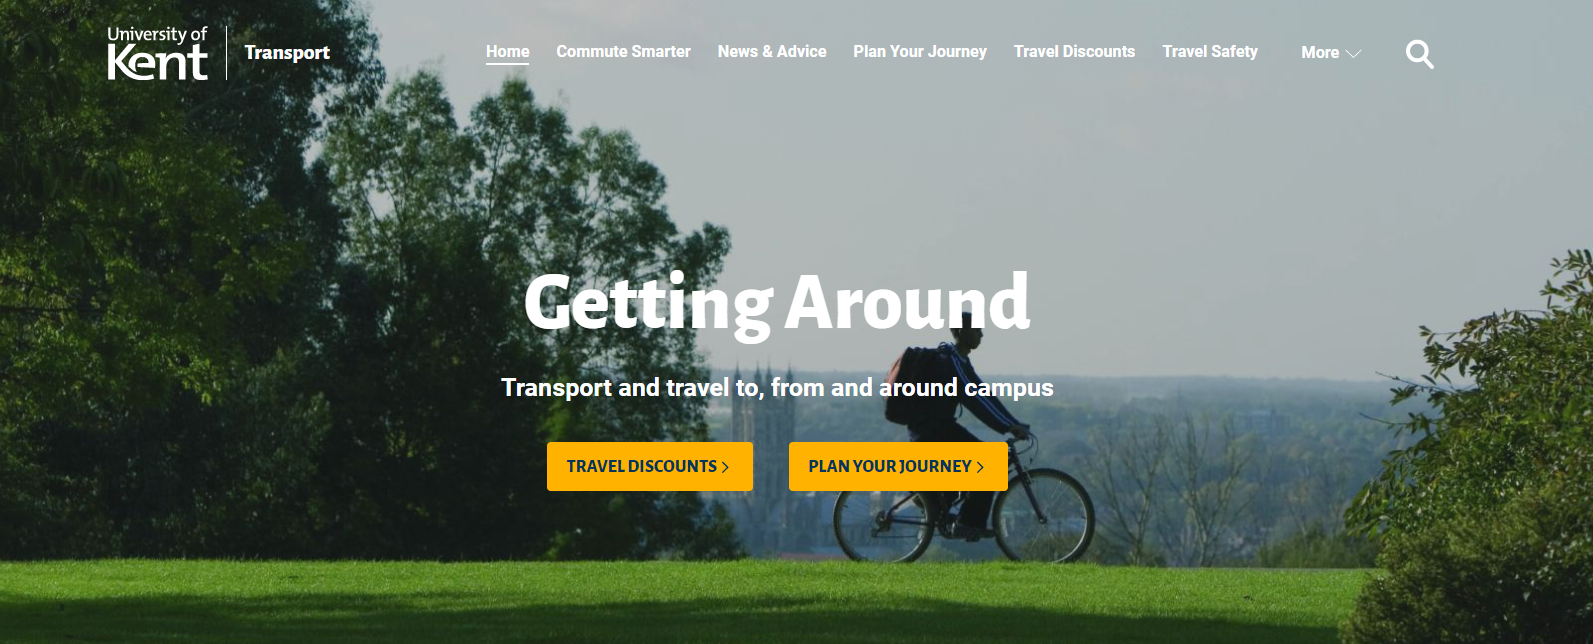 New Transport & Travel web page image